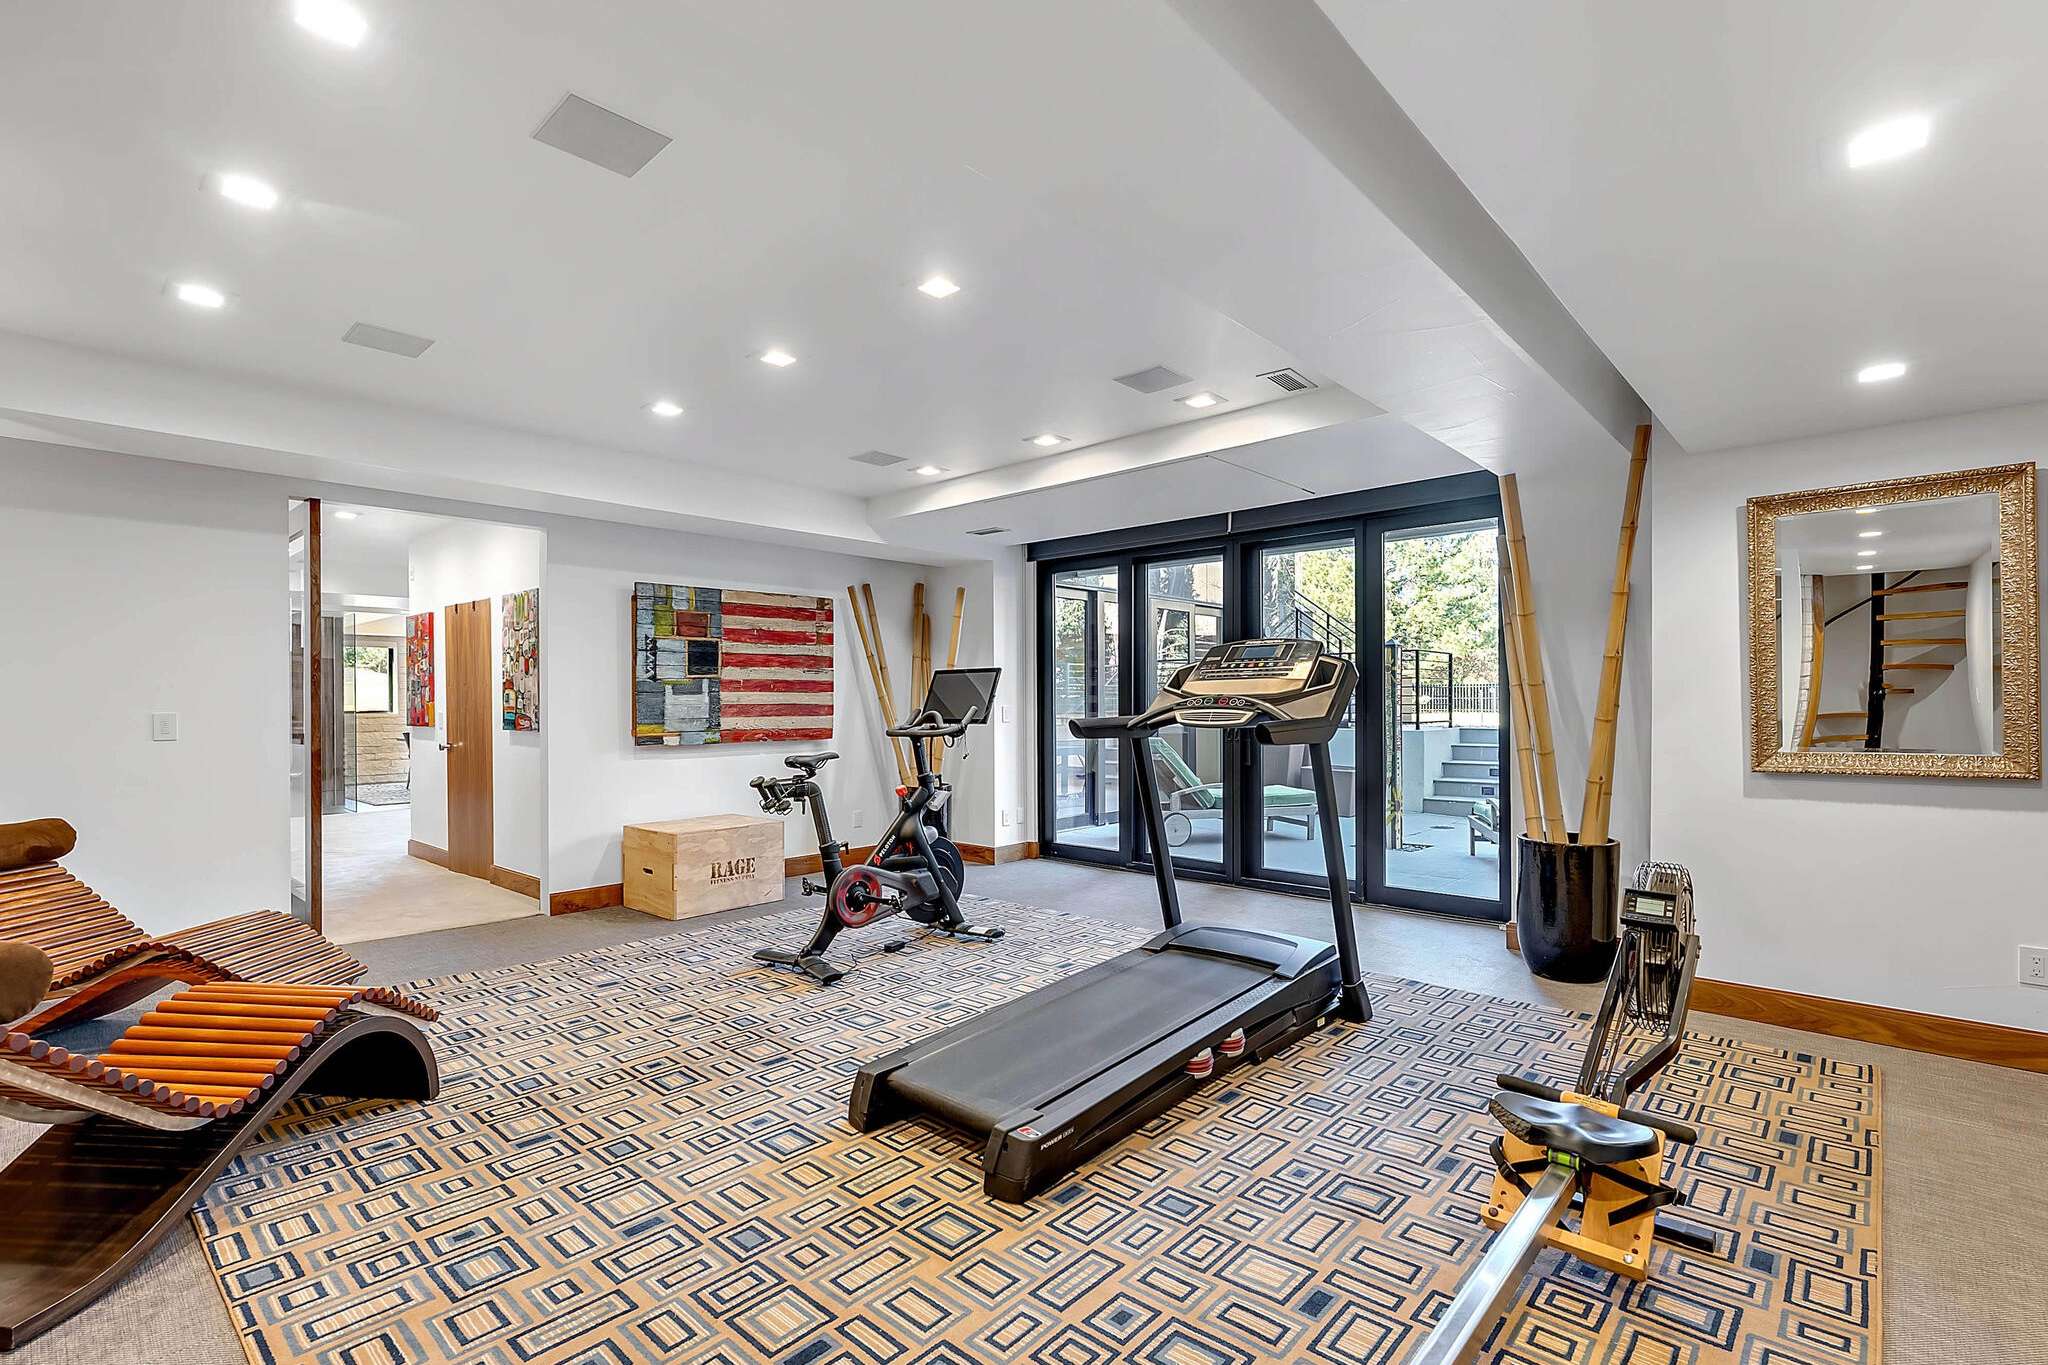 41 of 57. Exercise Room